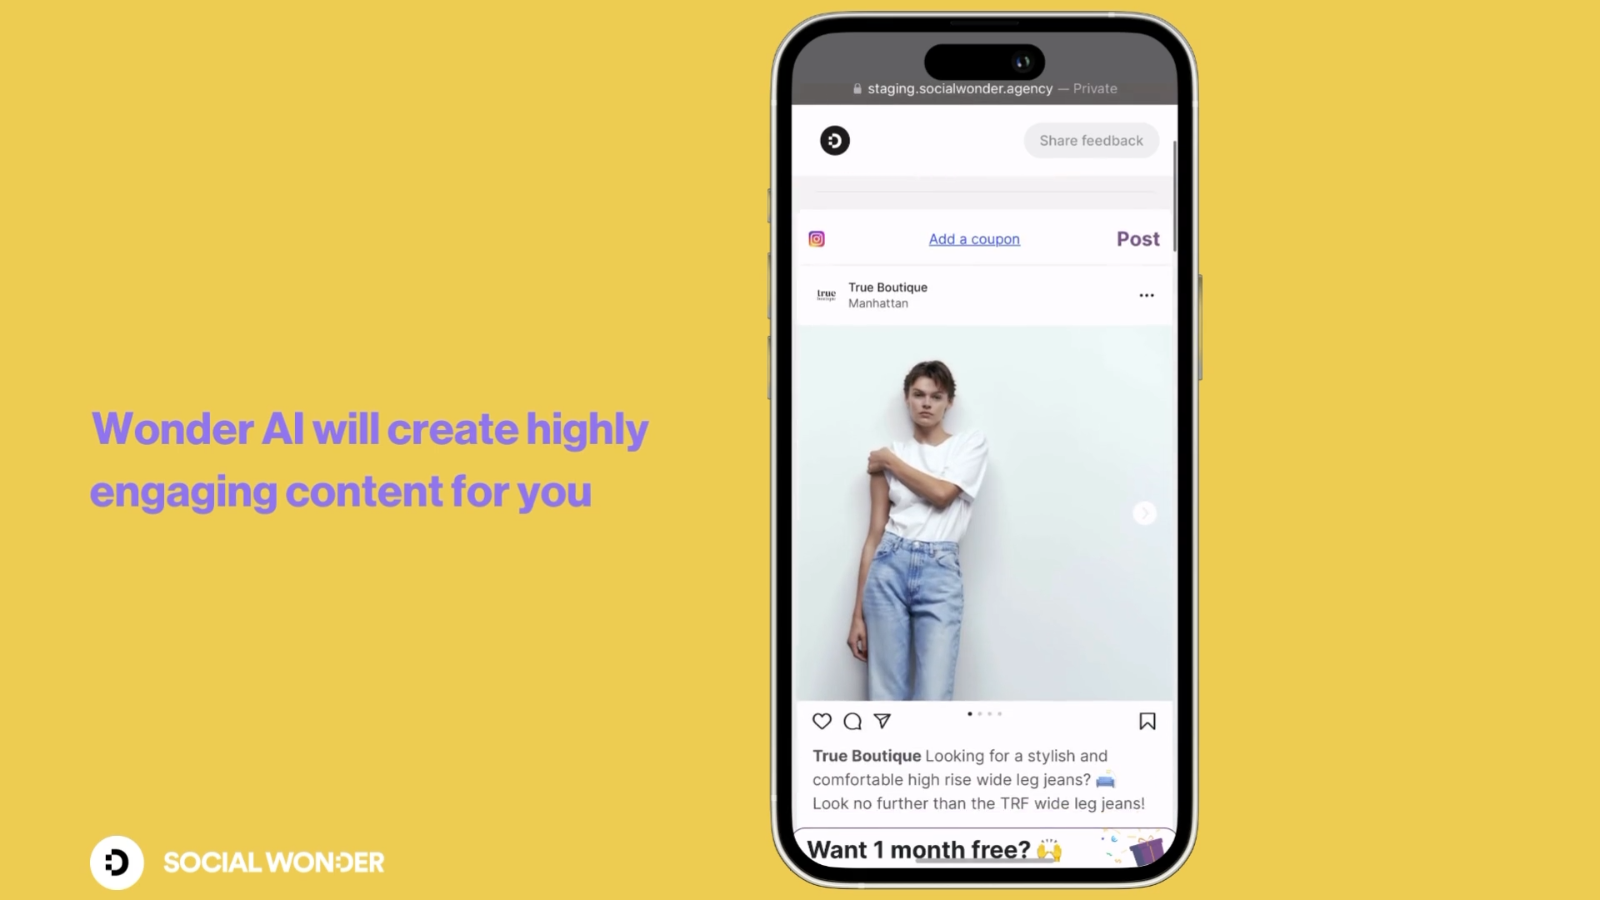 Wonder AI will create highly engaging content for you